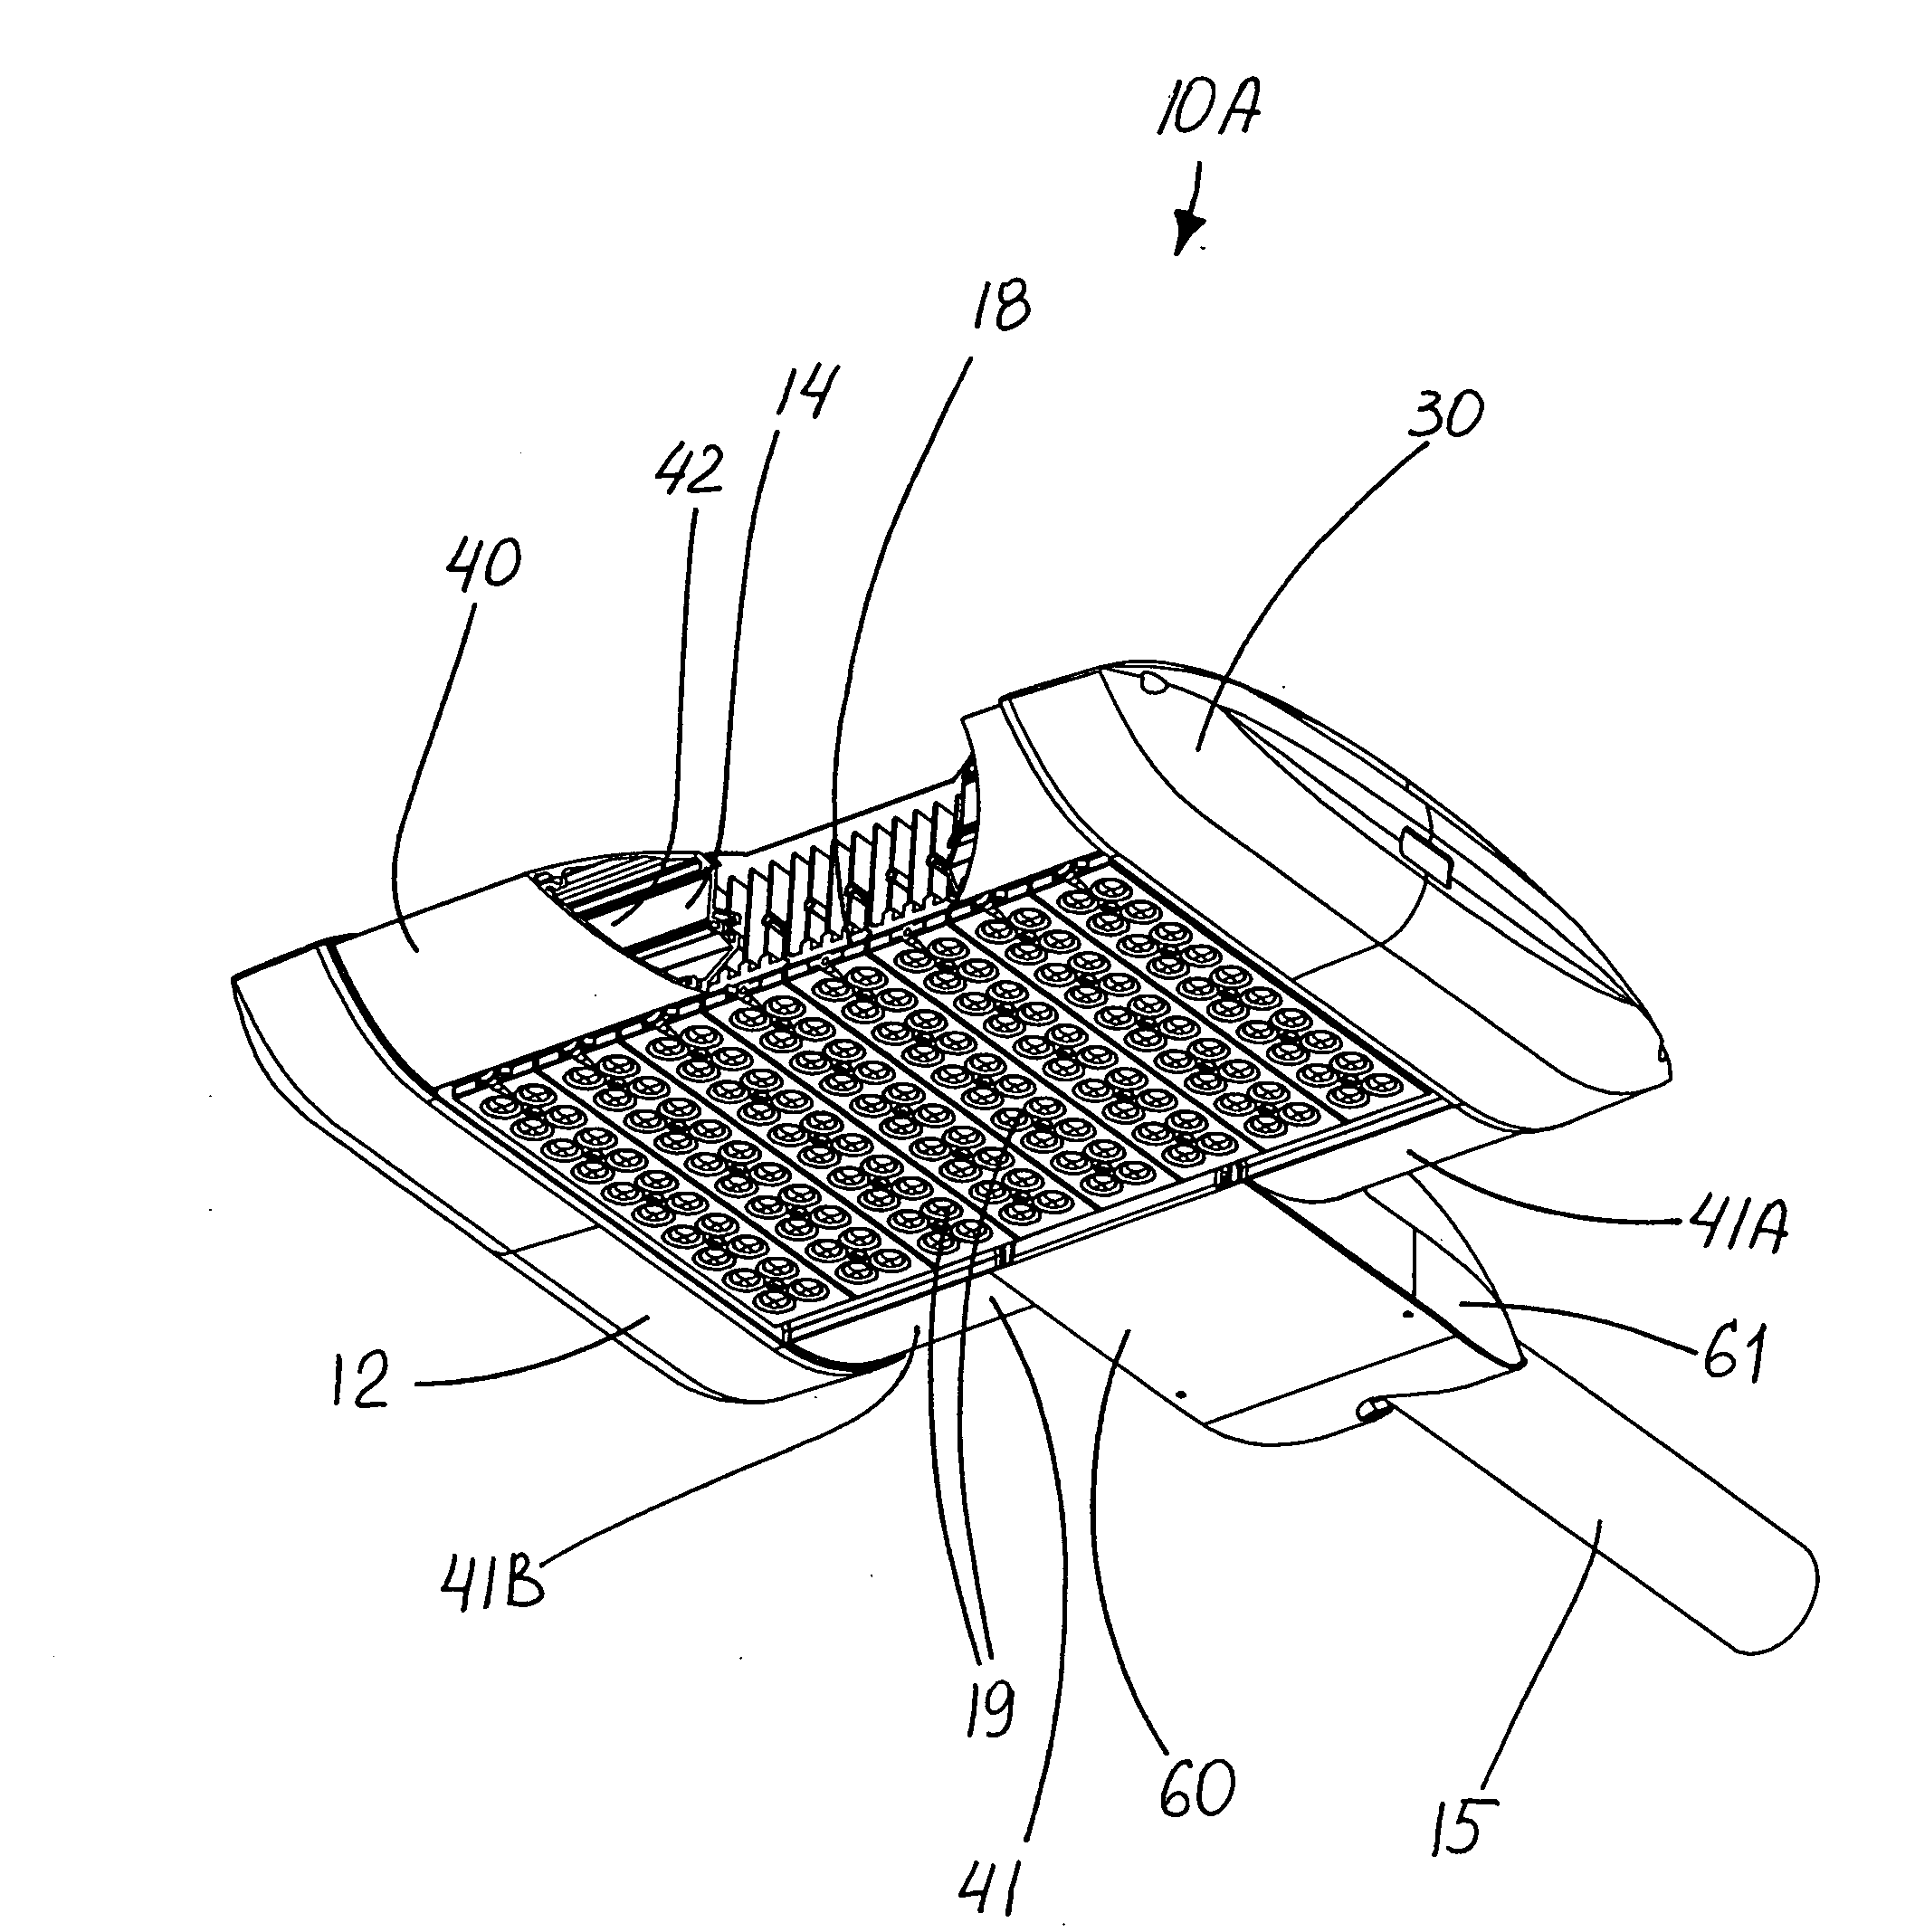 LED Light Fixture with Uninterruptible Power Supply